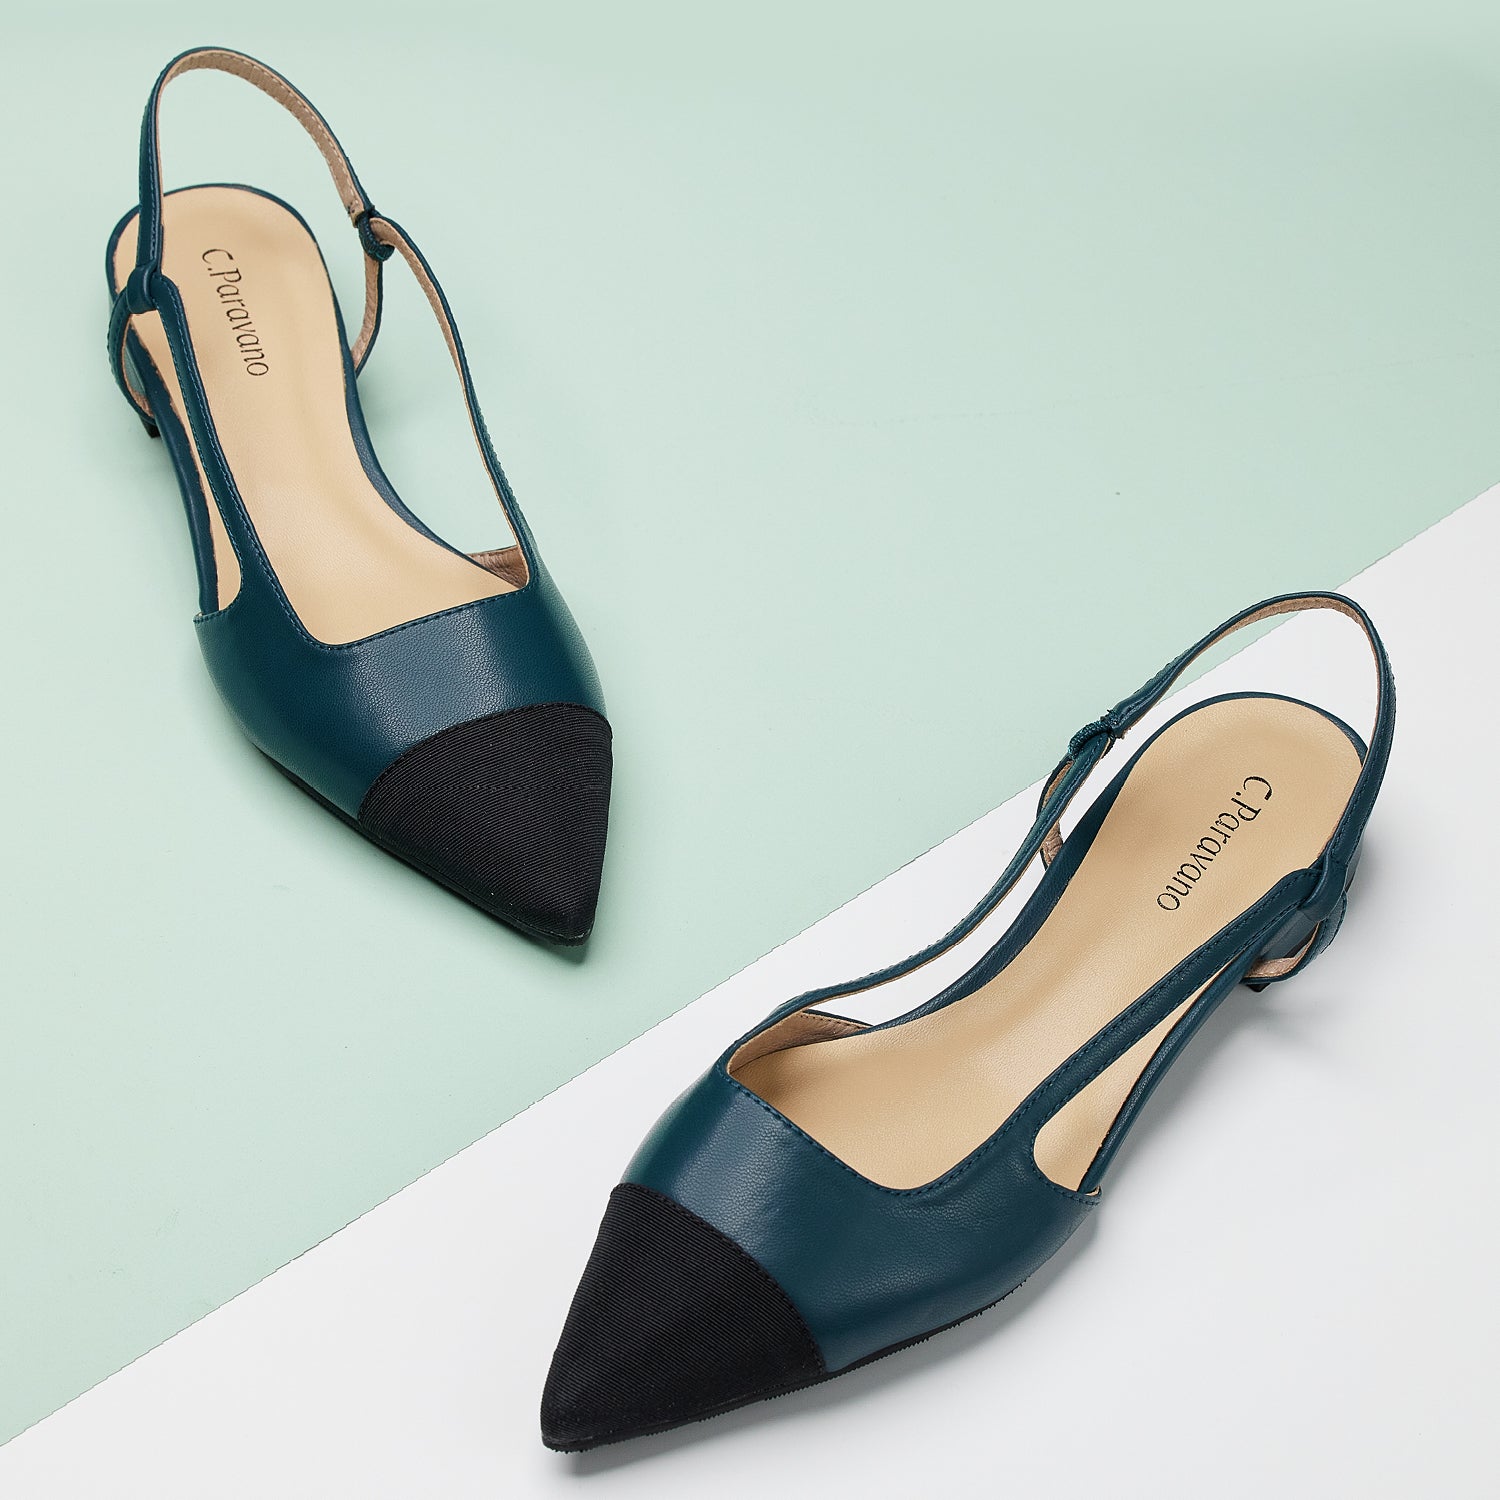 Blue Slingback Flats with a pointed toe, a timeless and versatile option for sophisticated styling